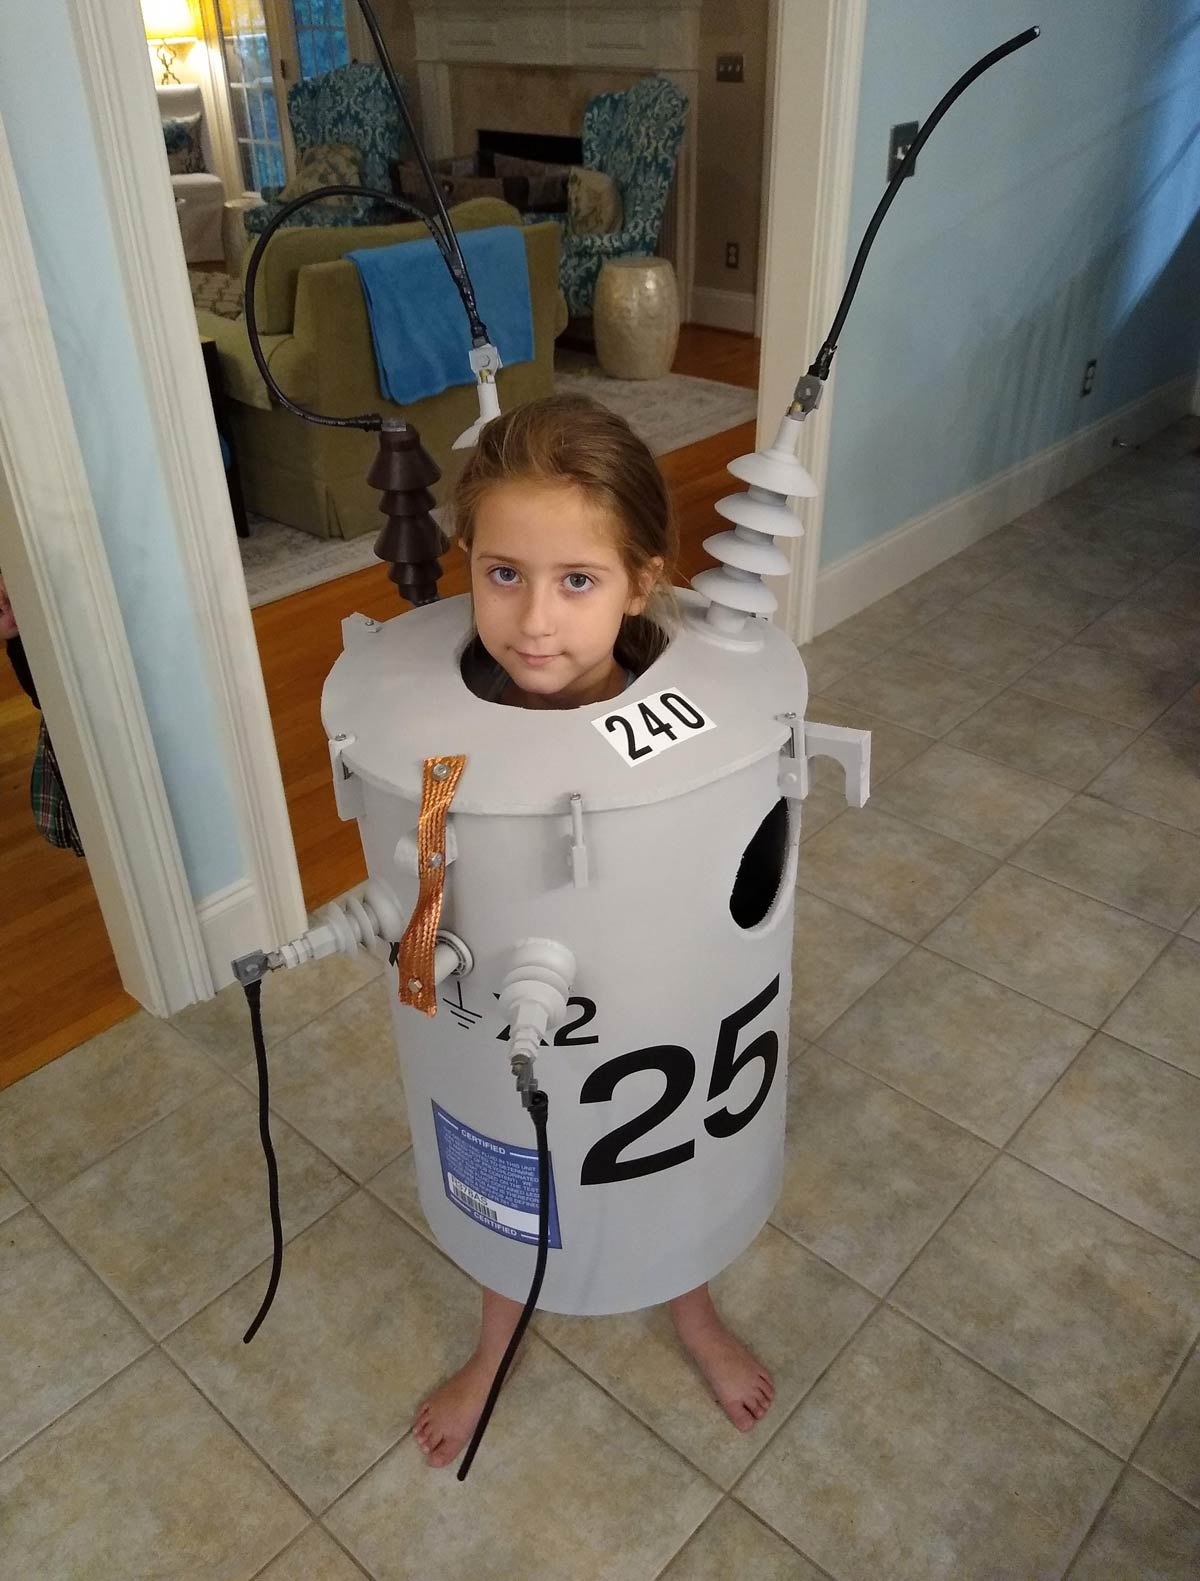 My daughter when she said she wanted to be a Transformer for Halloween